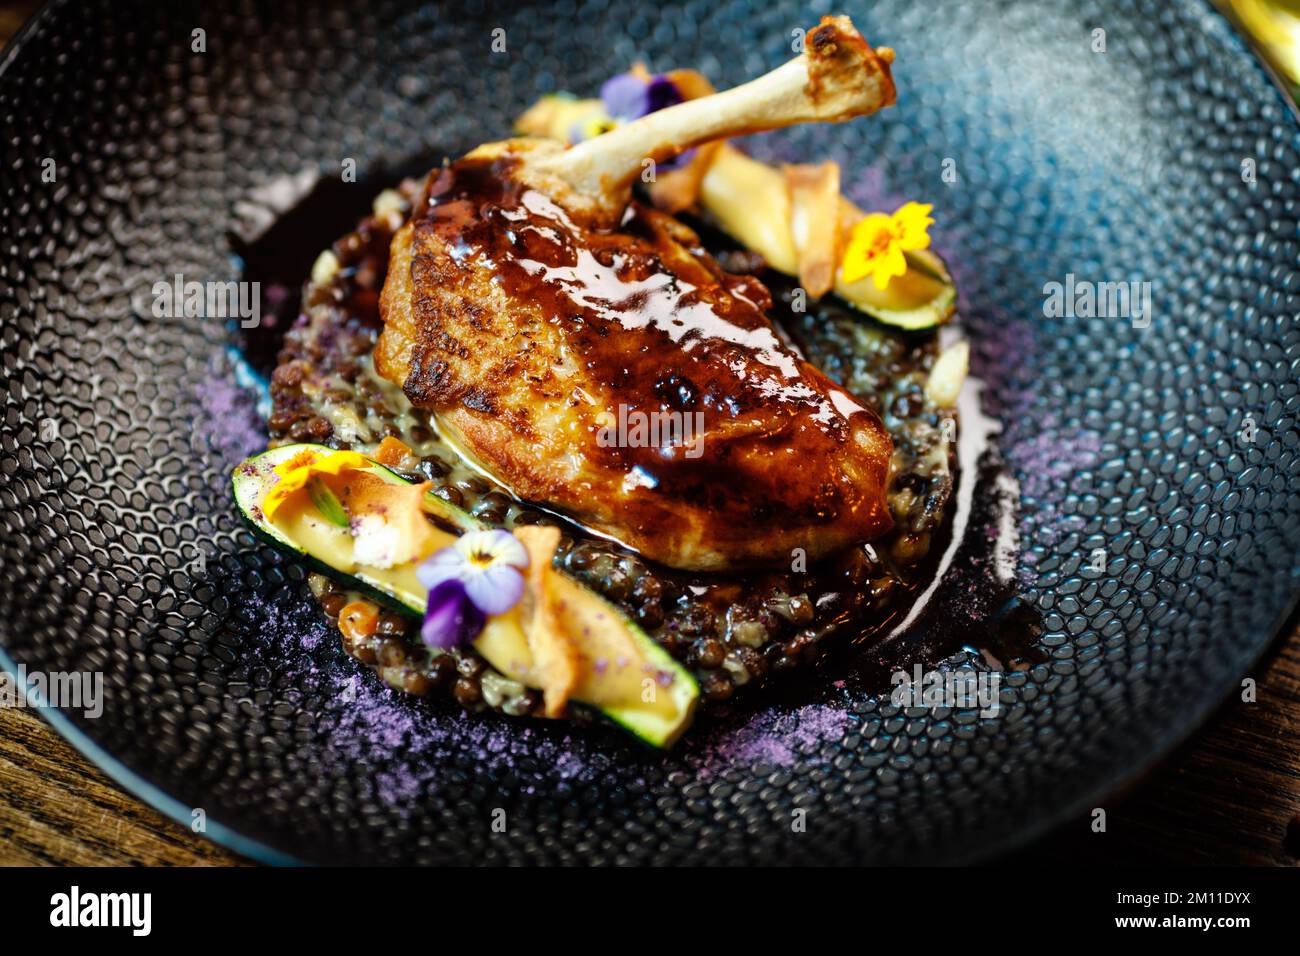 Corn chicken supreme. Beluga lentils, Old Ammerlander cheese, mini zucchini, red wine sauce. Delicious healthy traditional food closeup served for Stock Photo